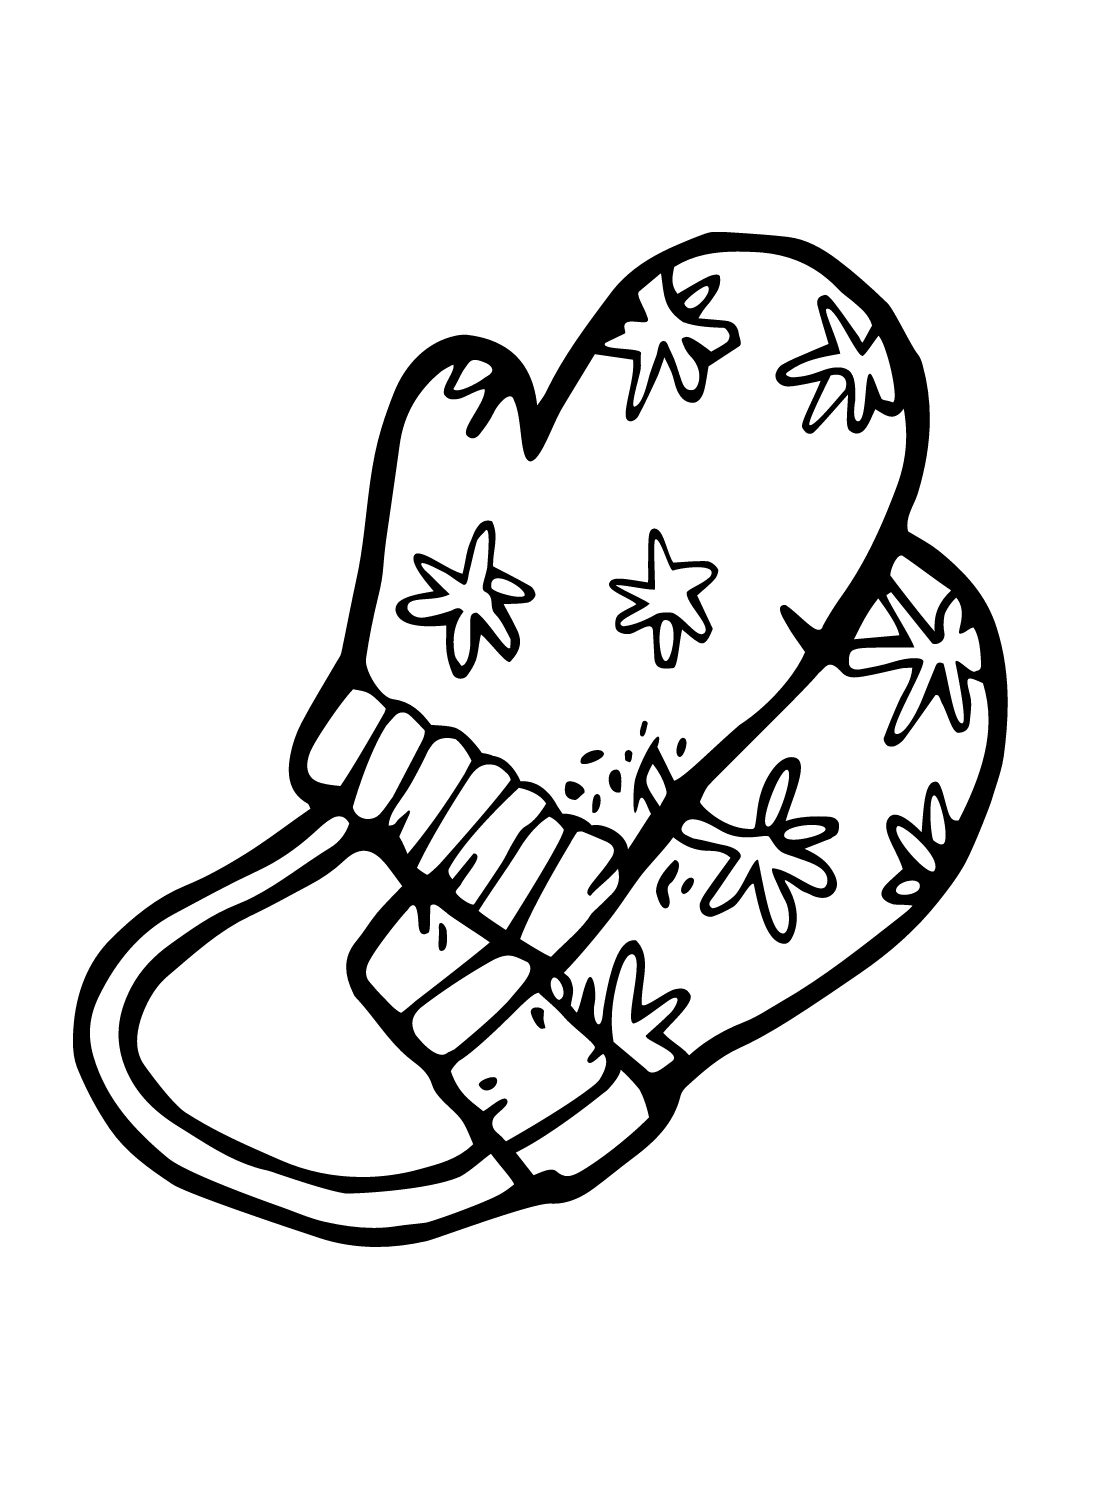 Printable Mittens Coloring Page